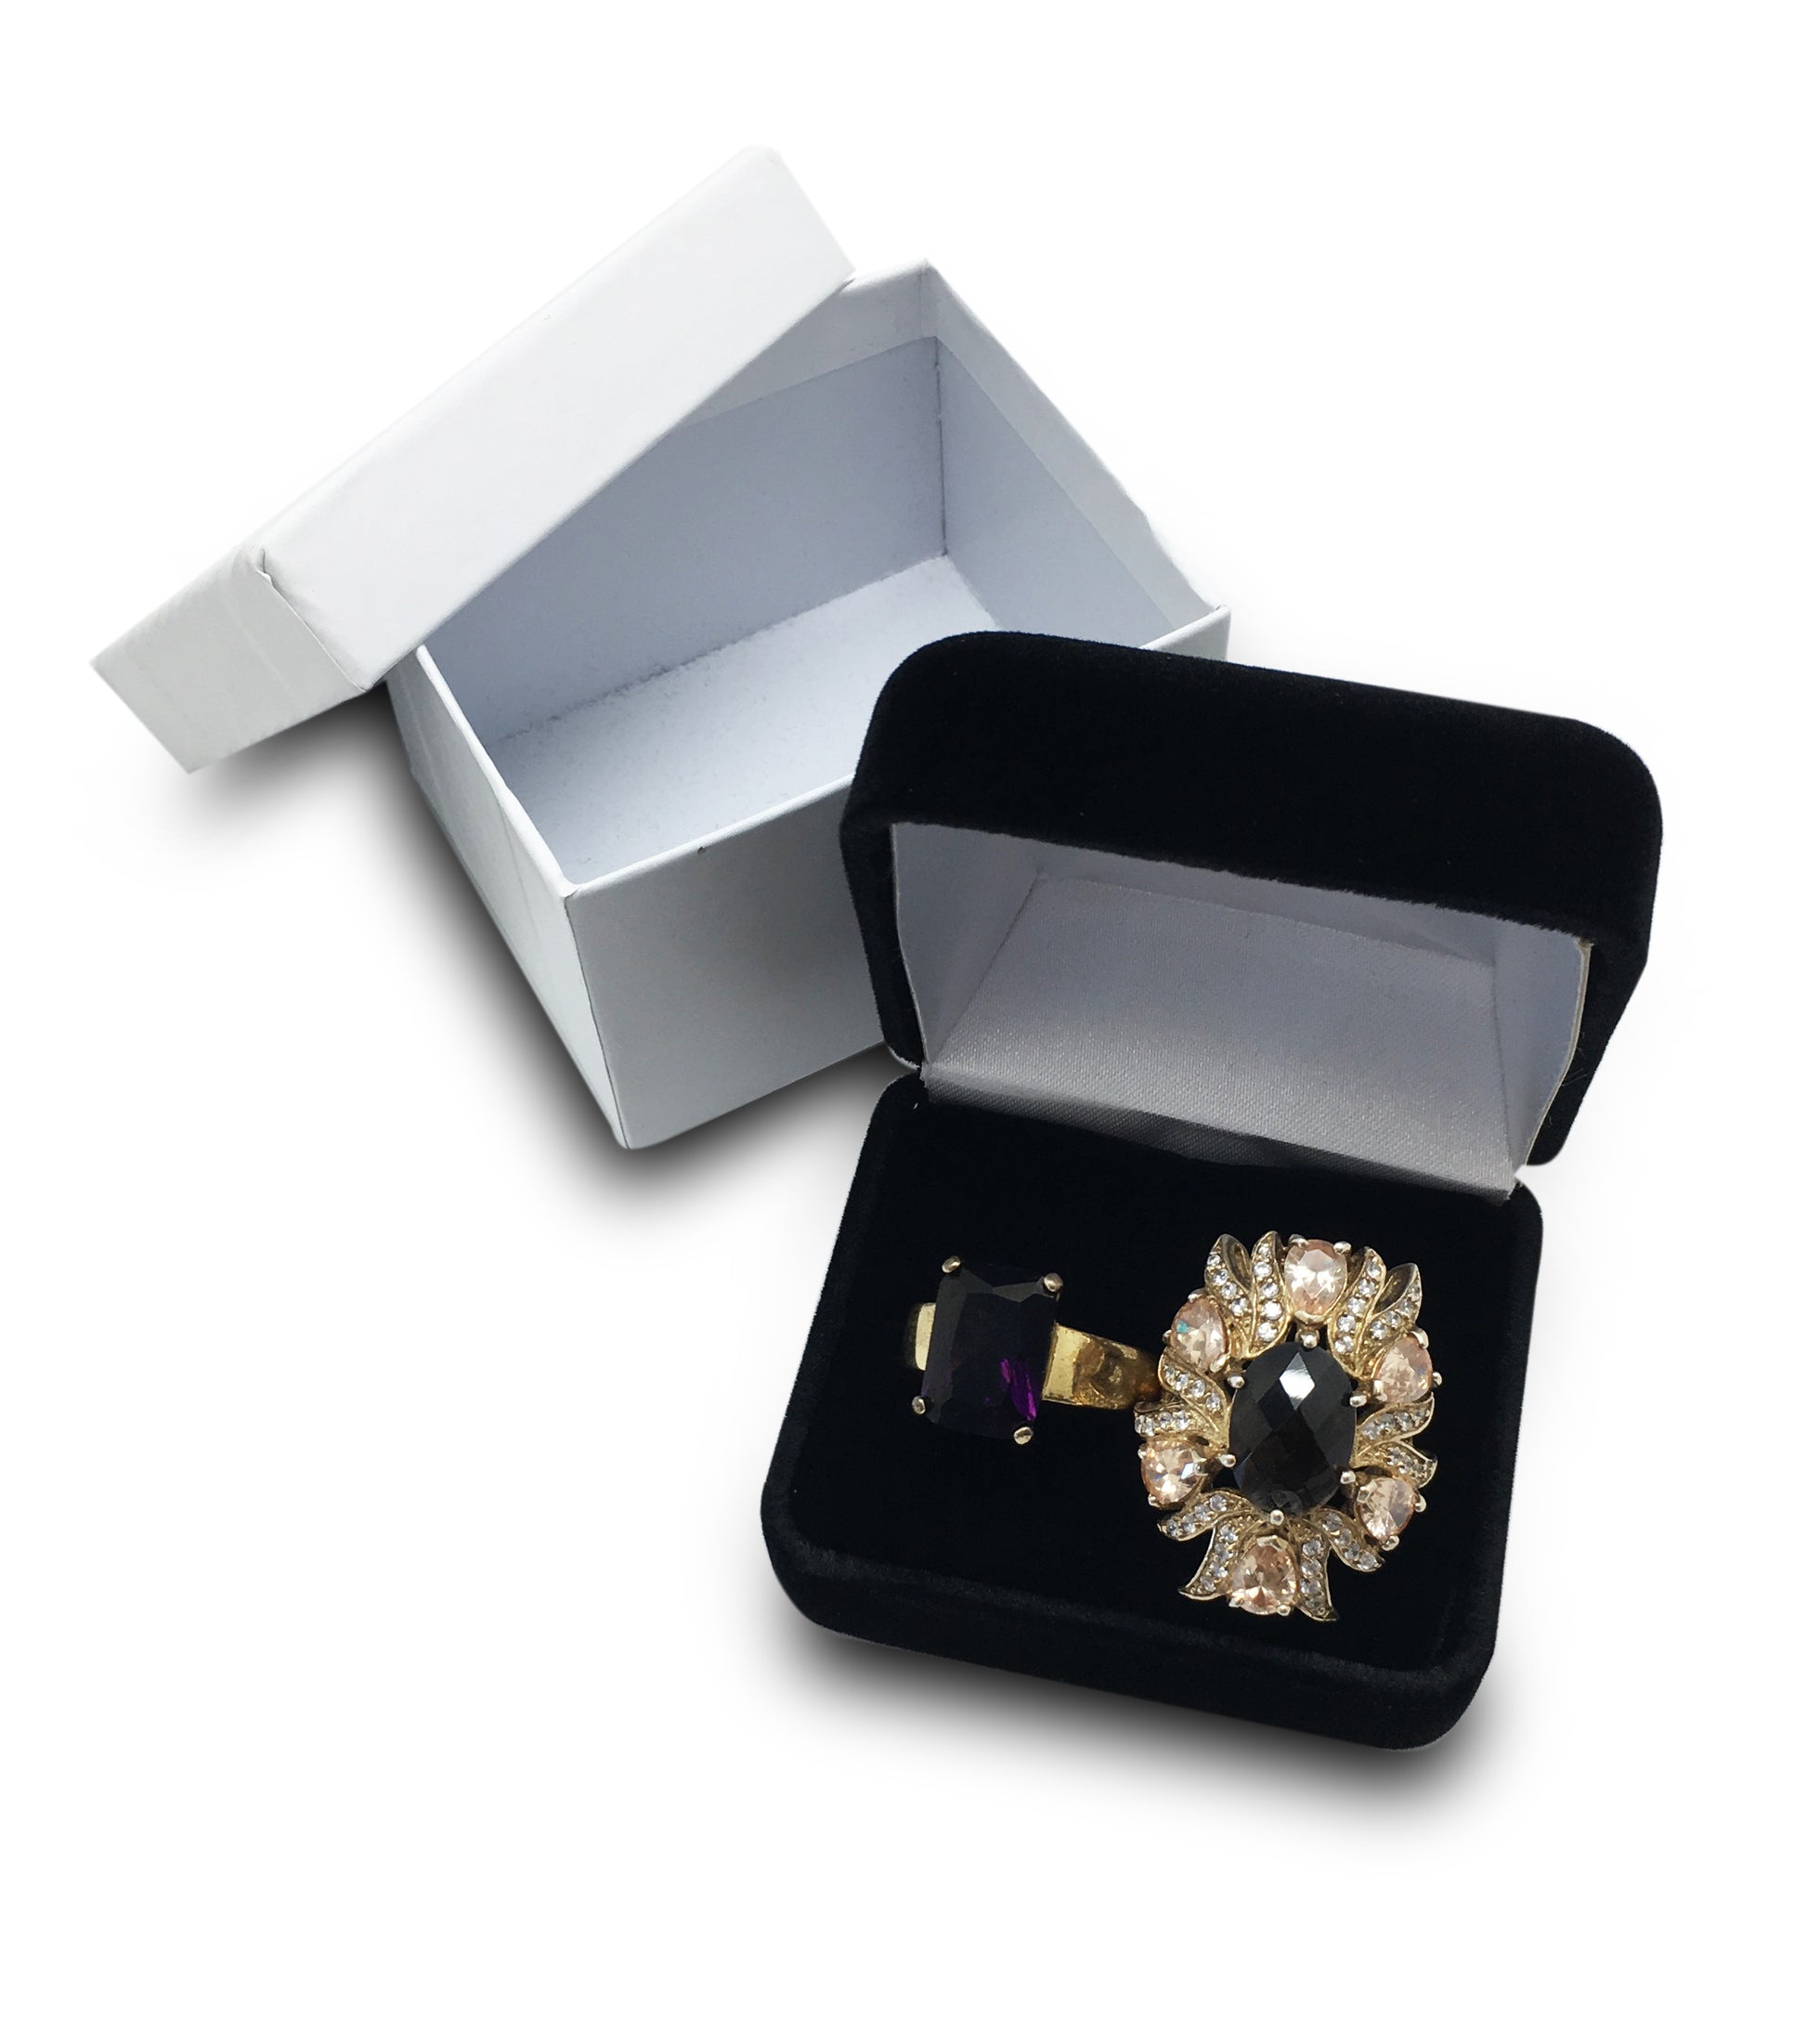 Deluxe Black Double Ring Jewelry Gift Box